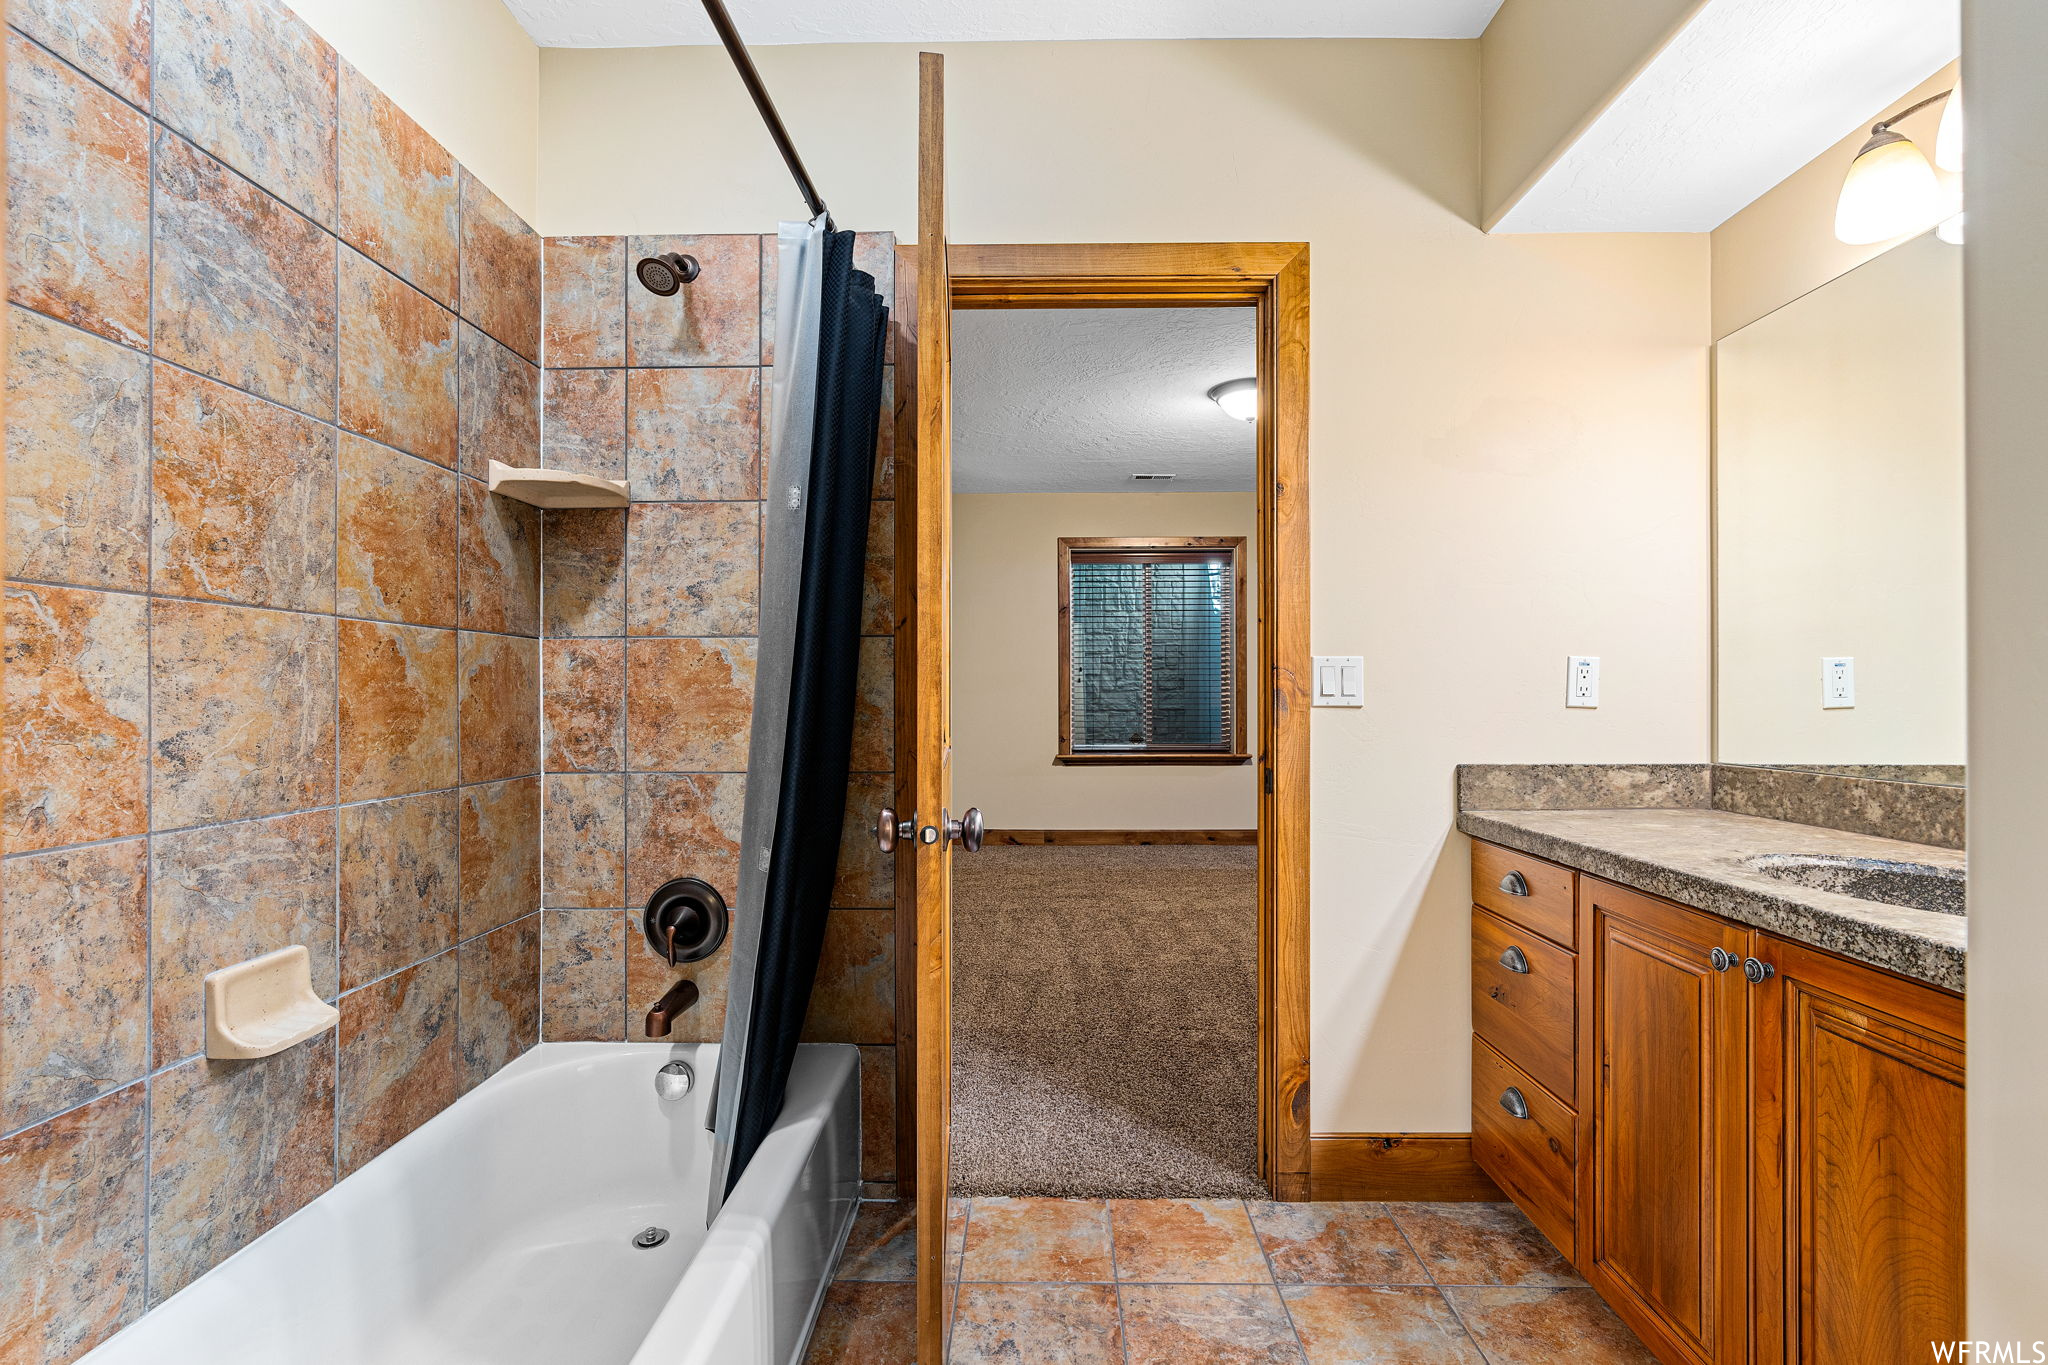 Bathroom featuring shower / bathtub combination with curtain, vanity, and tile floors